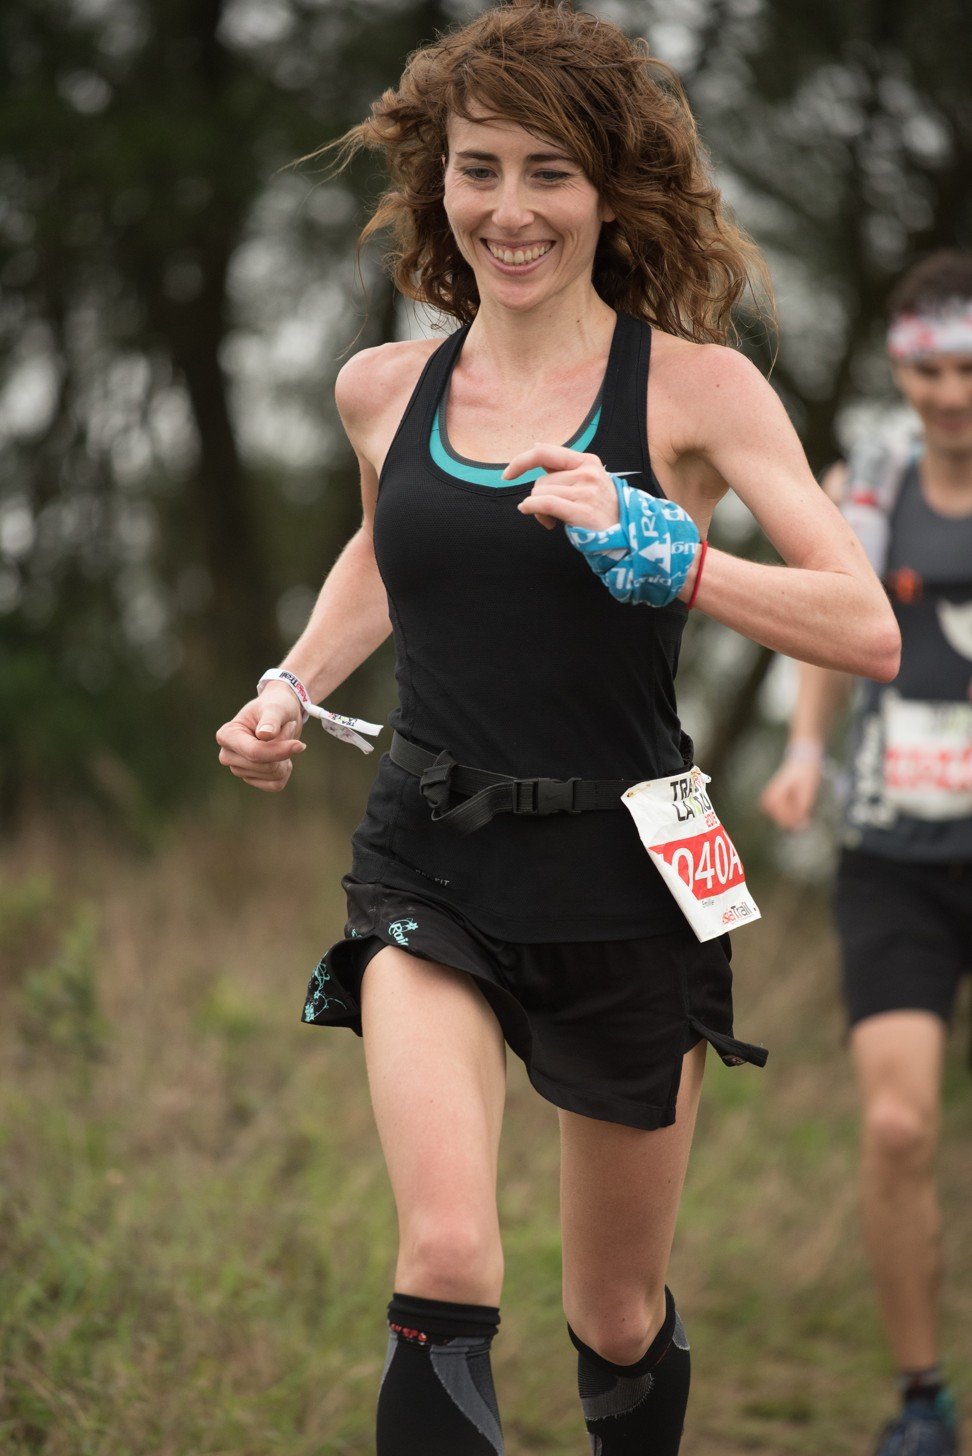 Saint-Pe competing in the Translantau 50k in March 2015, where she placed first runner-up in a mixed team of two. Photo: Kevin Law, HKrun